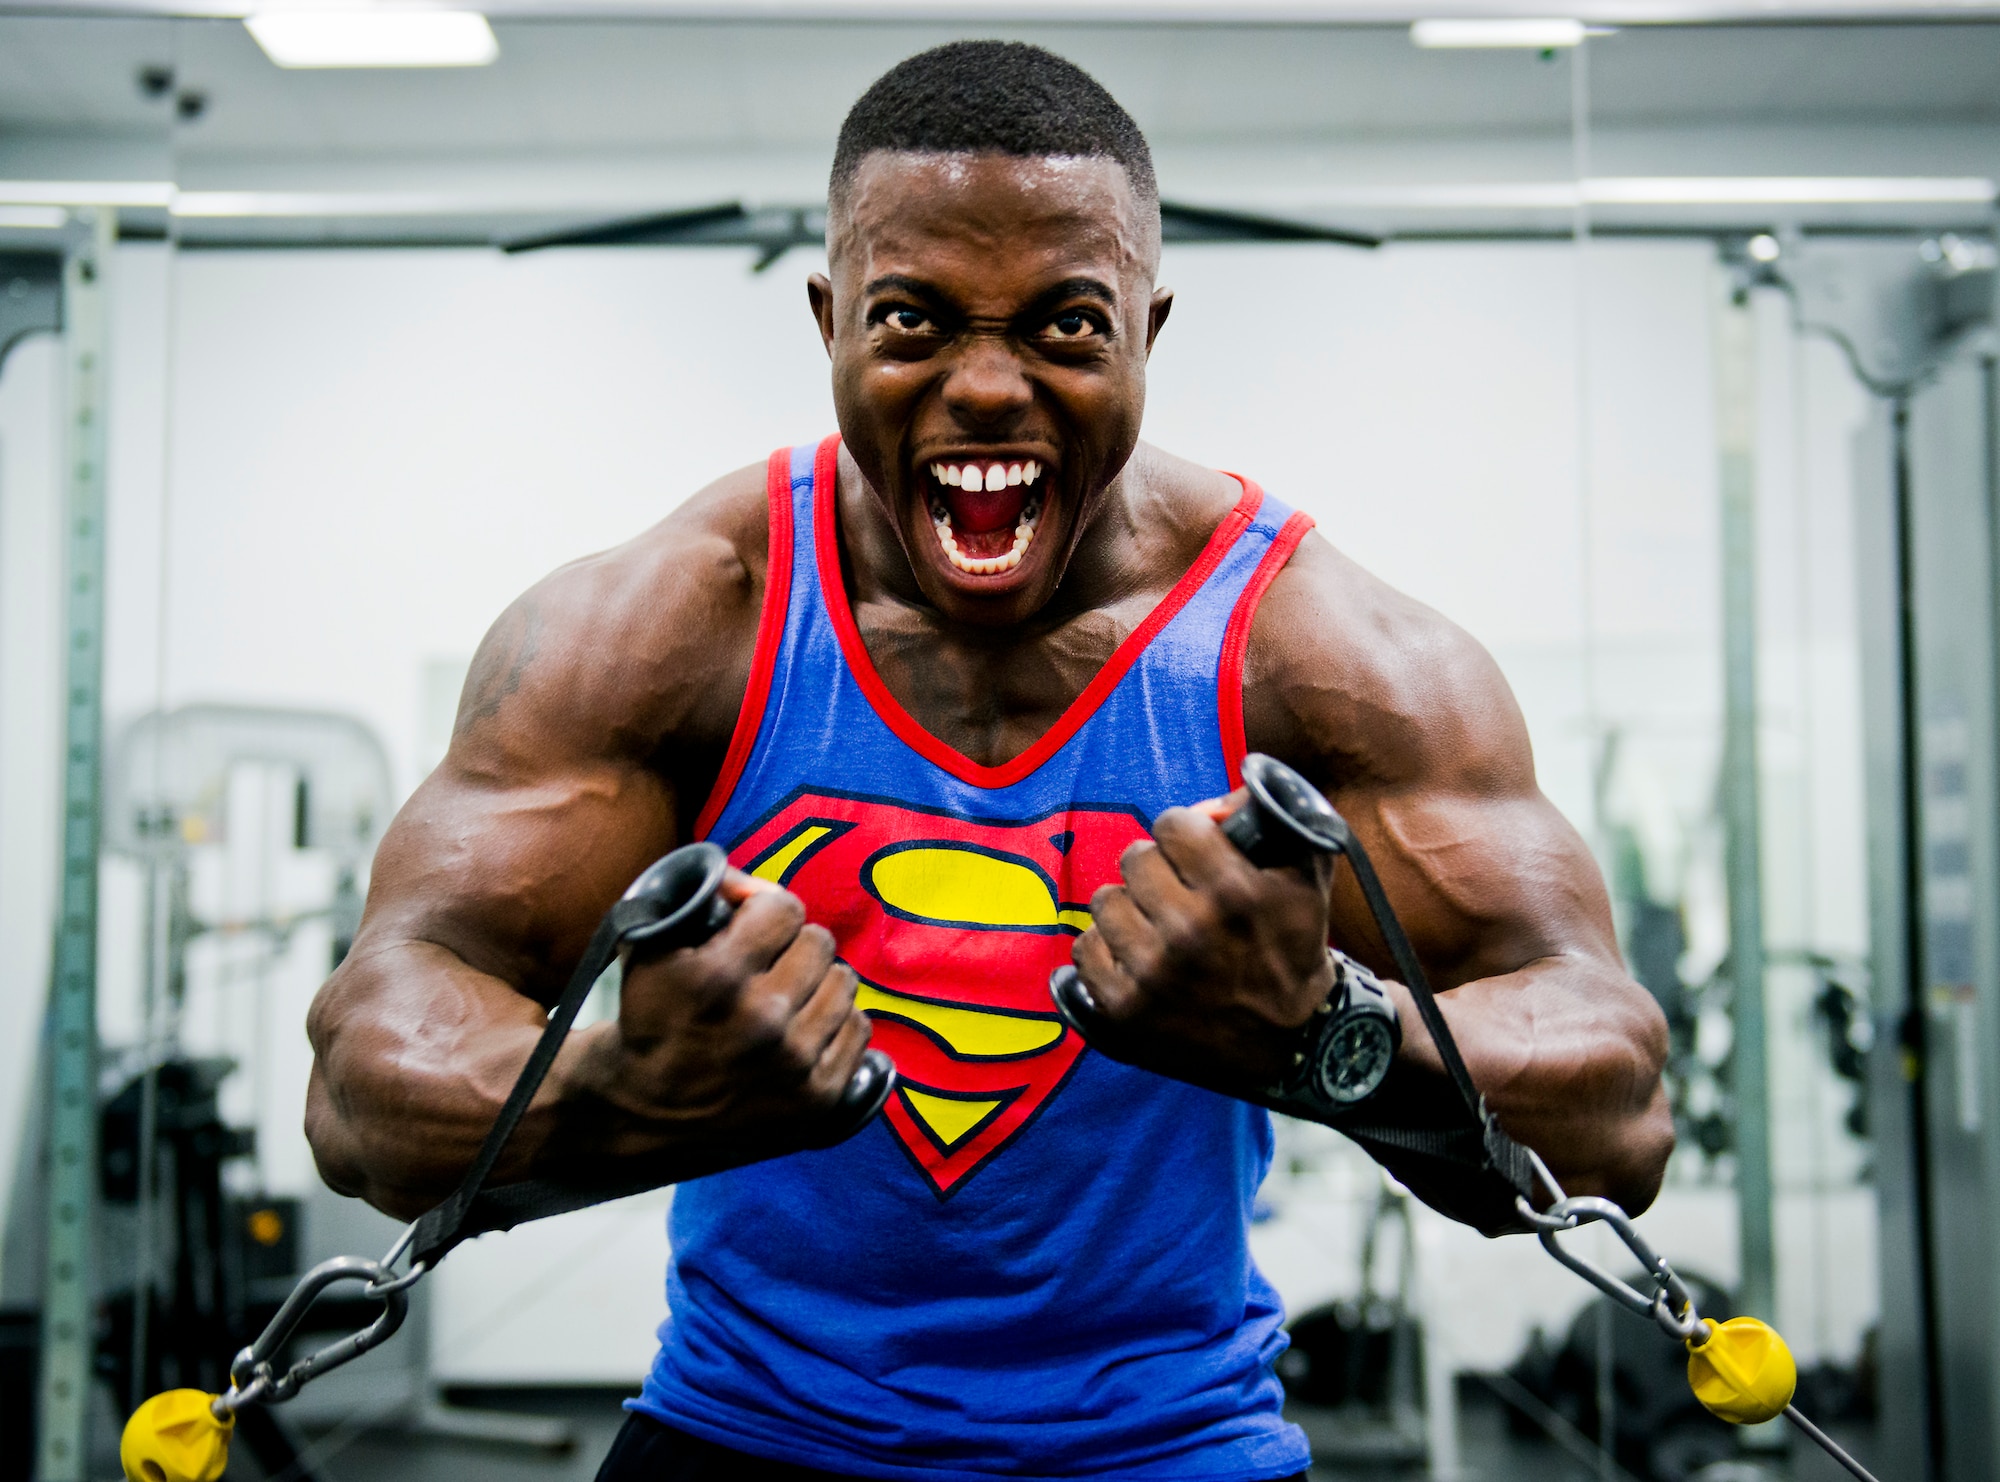 The Top 10 Celebrity Ab Workouts – Superhero Jacked